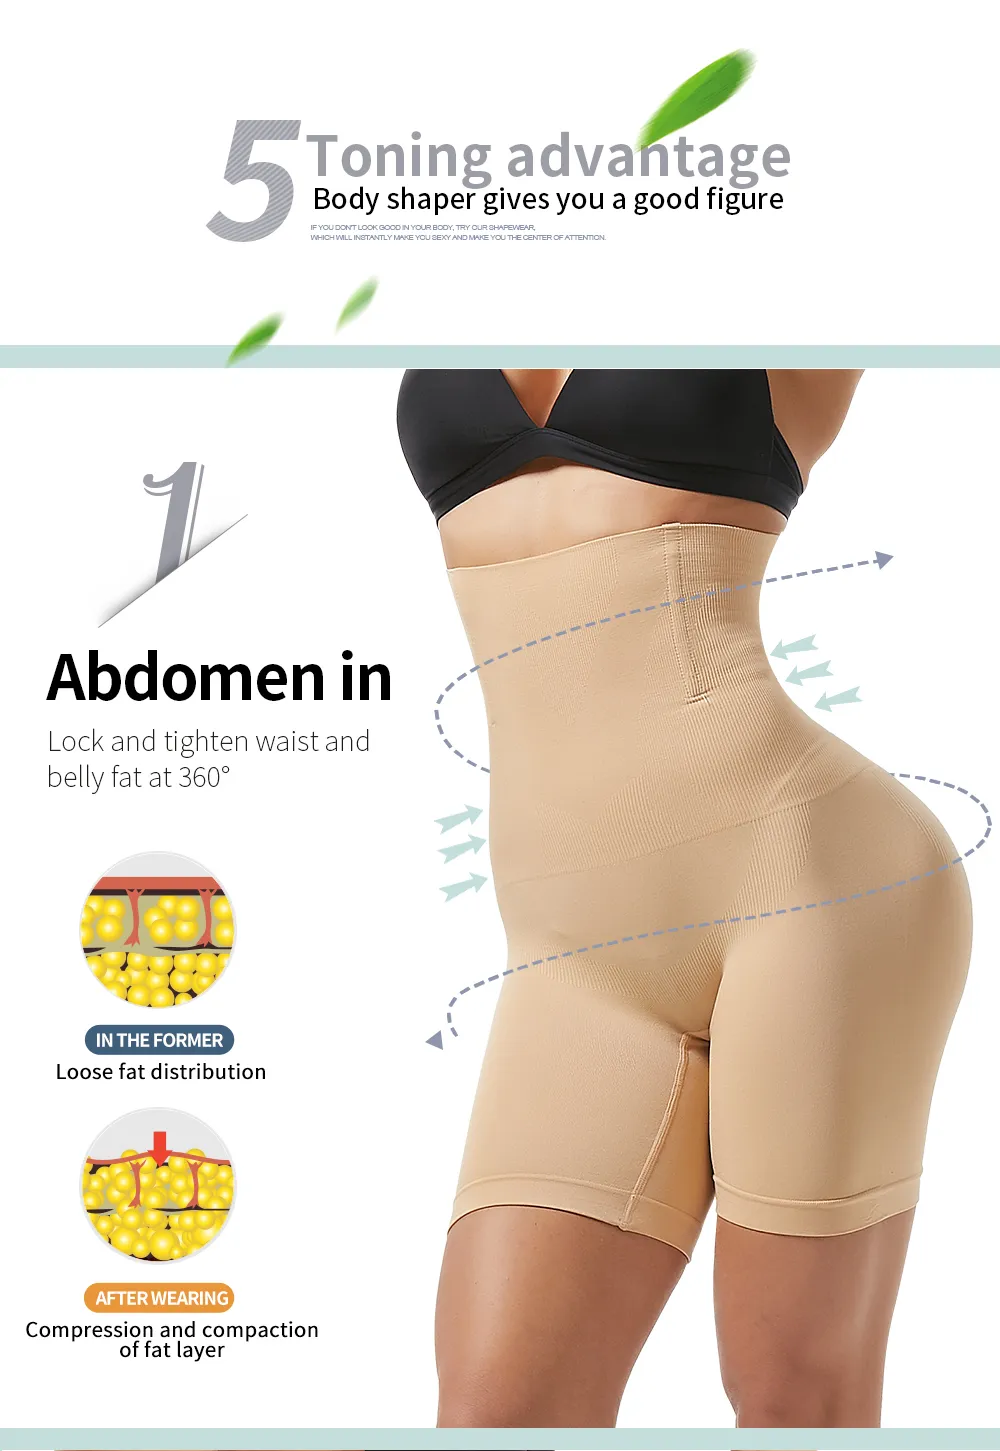 Womens Waist Trainer Scmi Shaper Belt For Slimming, Butt Lifter, And Tummy  Control Shapewear Underwear With Girdle Belt 201222 From Dou02, $11.41